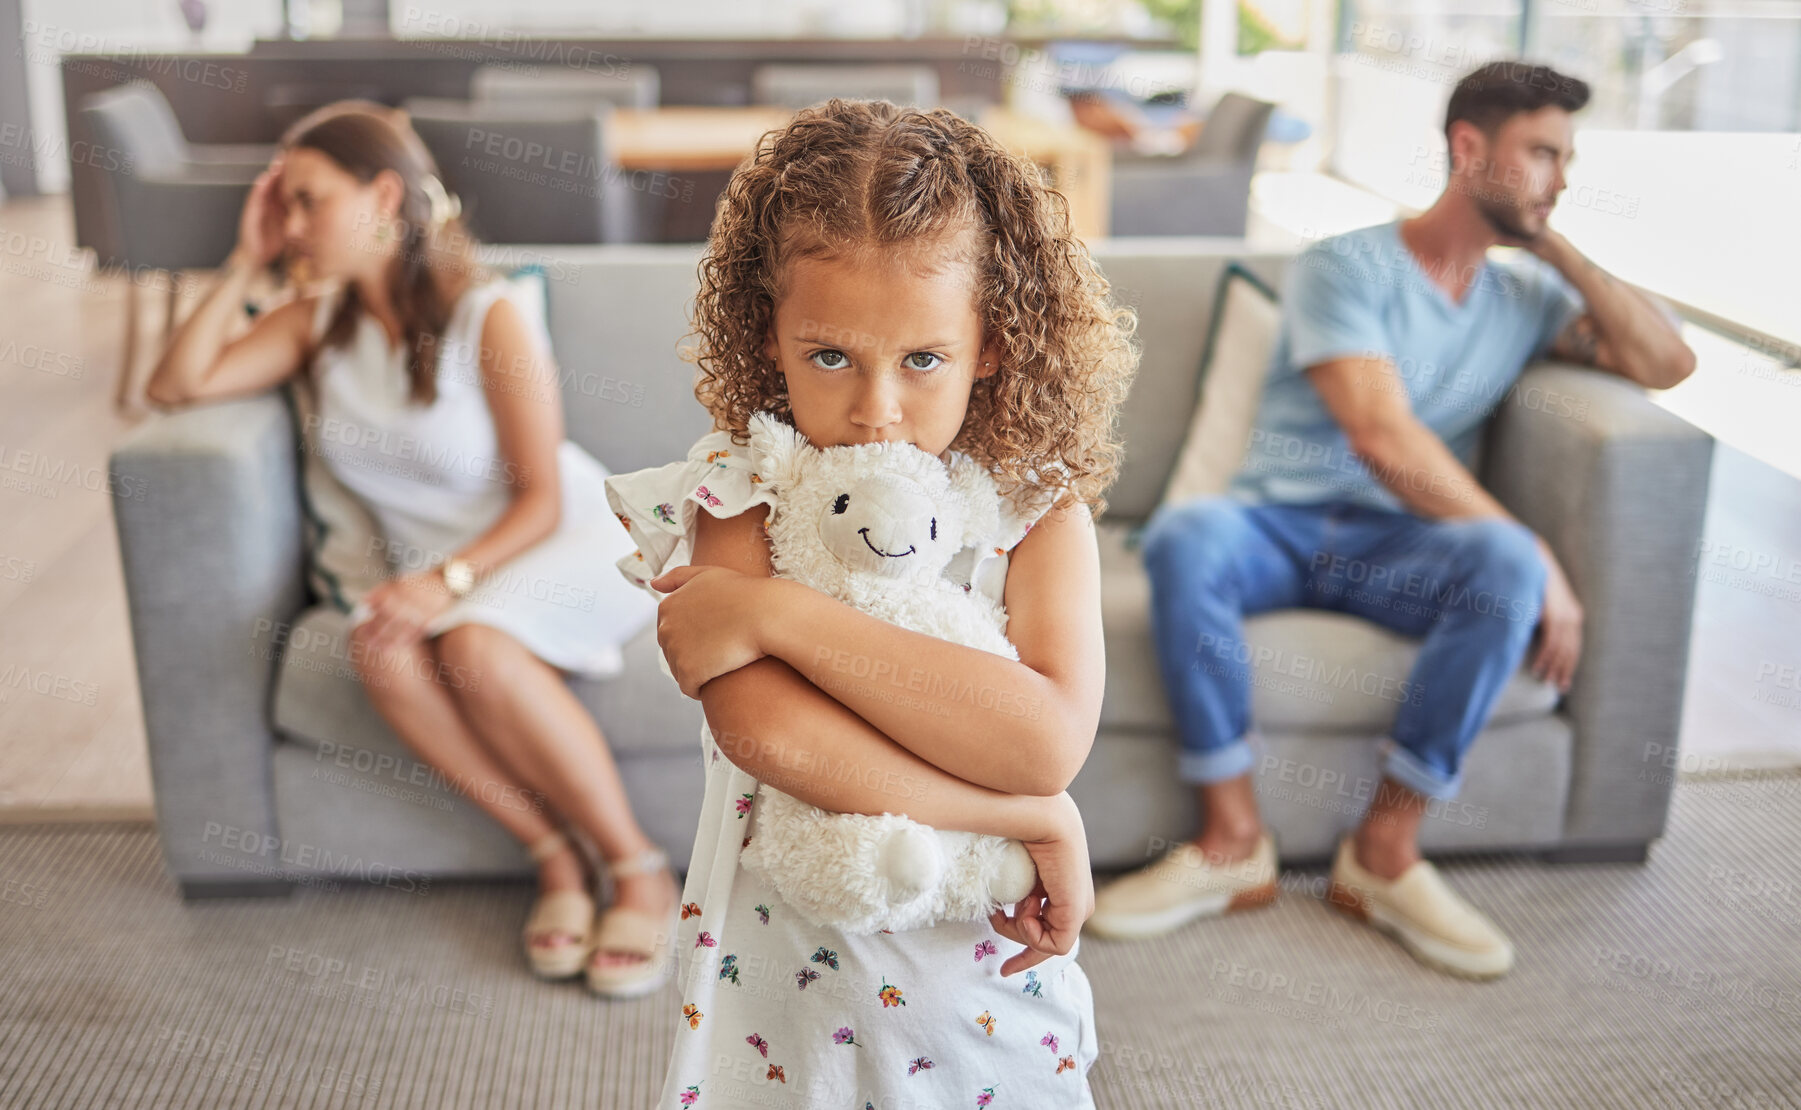 Buy stock photo Sad girl, fighting parents thinking of divorce in living room and child scared family will separate. Depressed toxic home worry kid with support needs, upset mother and frustrated father in argument